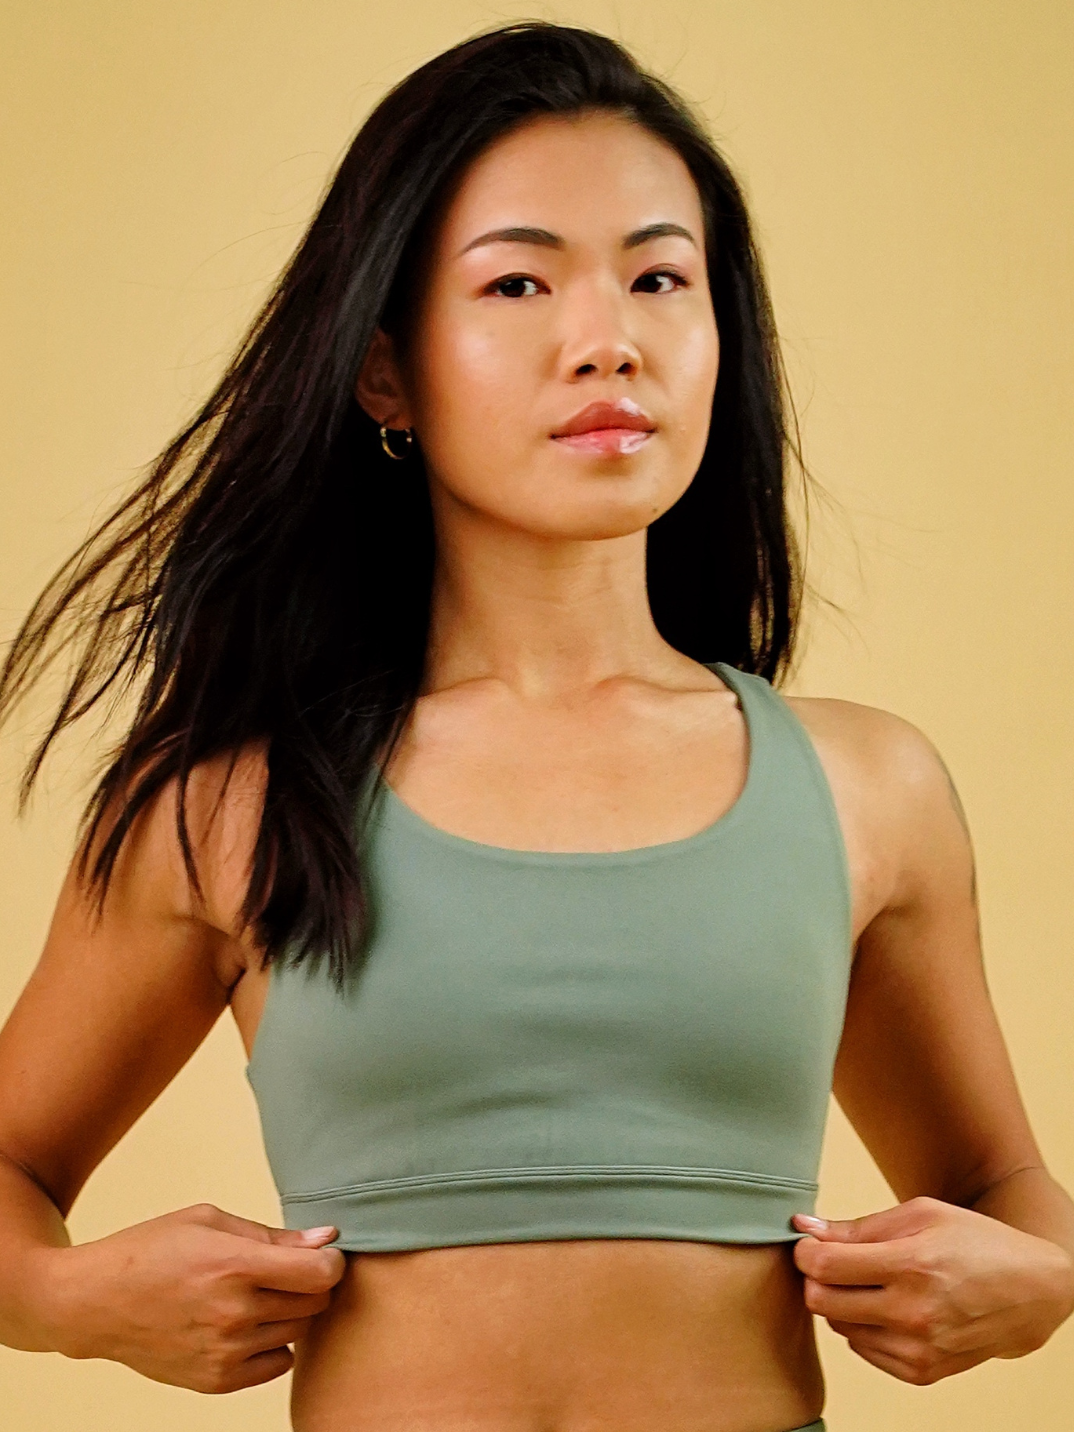 everyday top sports bra natural green eco-friendly ethical activewear made from recycled plastic bottles